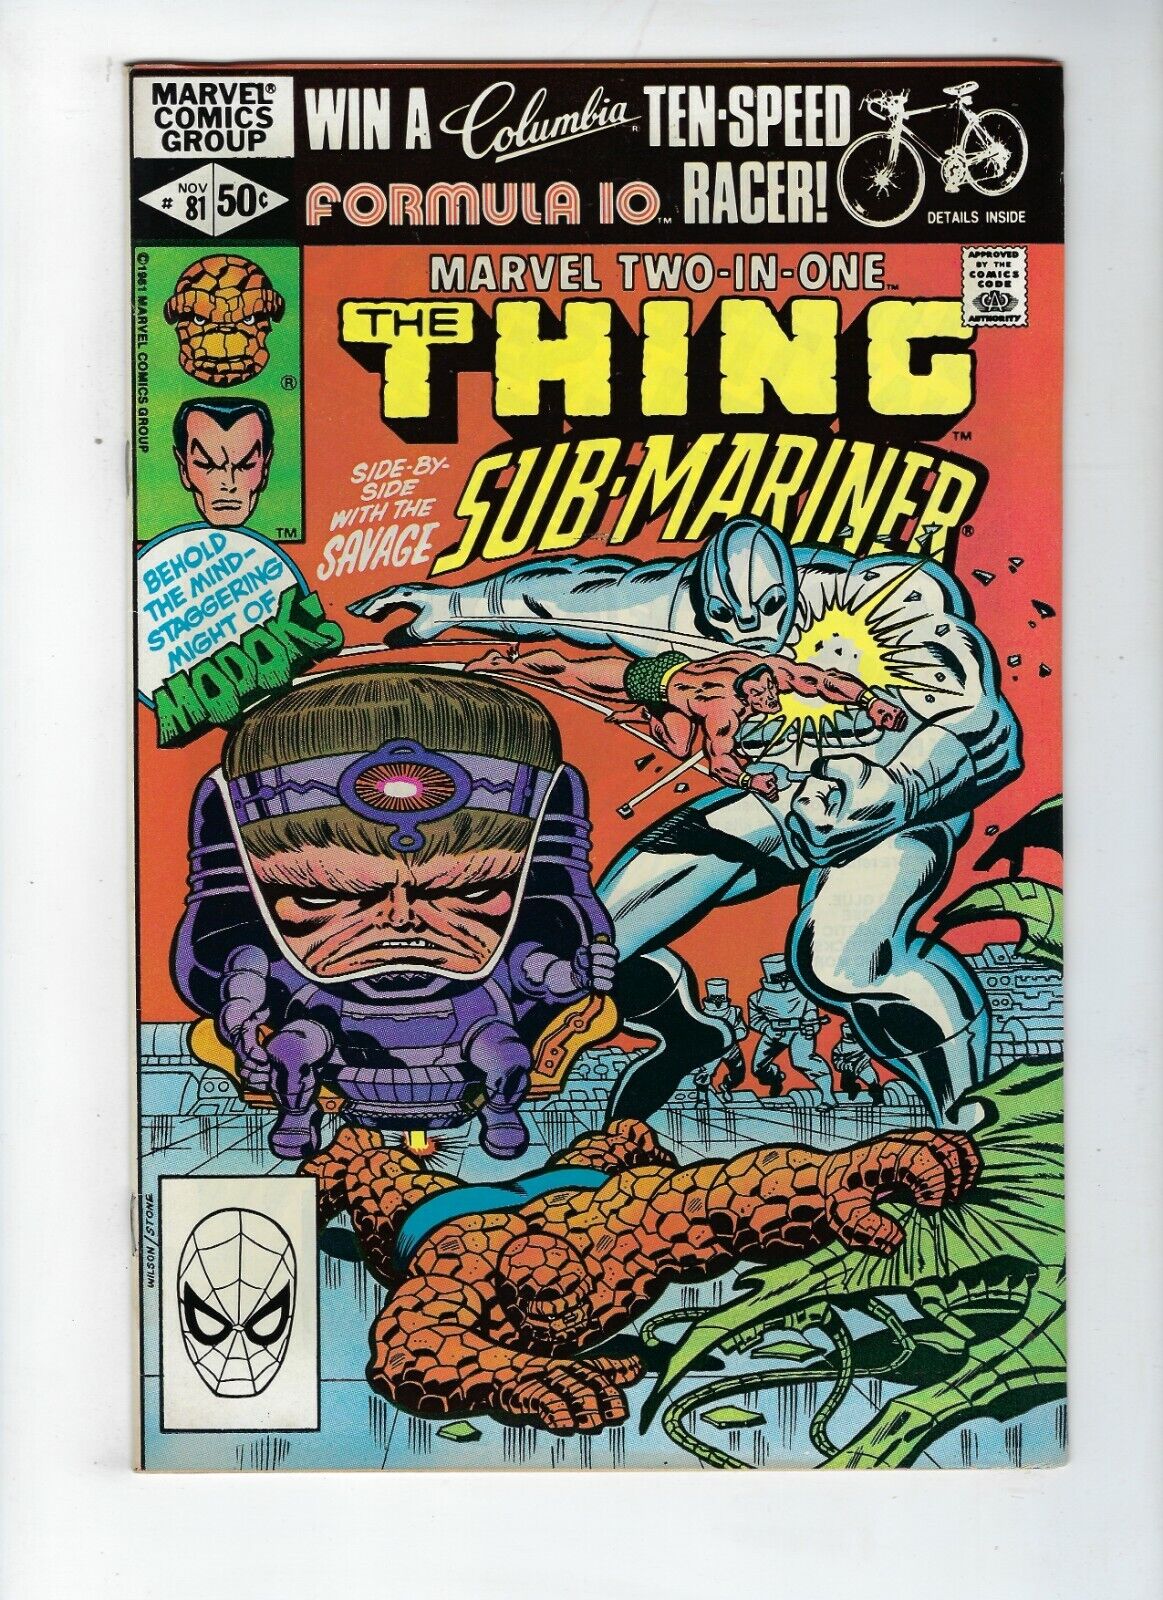 MARVEL TWO IN ONE # 81 (THE THING & SUB-MARINER, NOV 1981) VF/NM